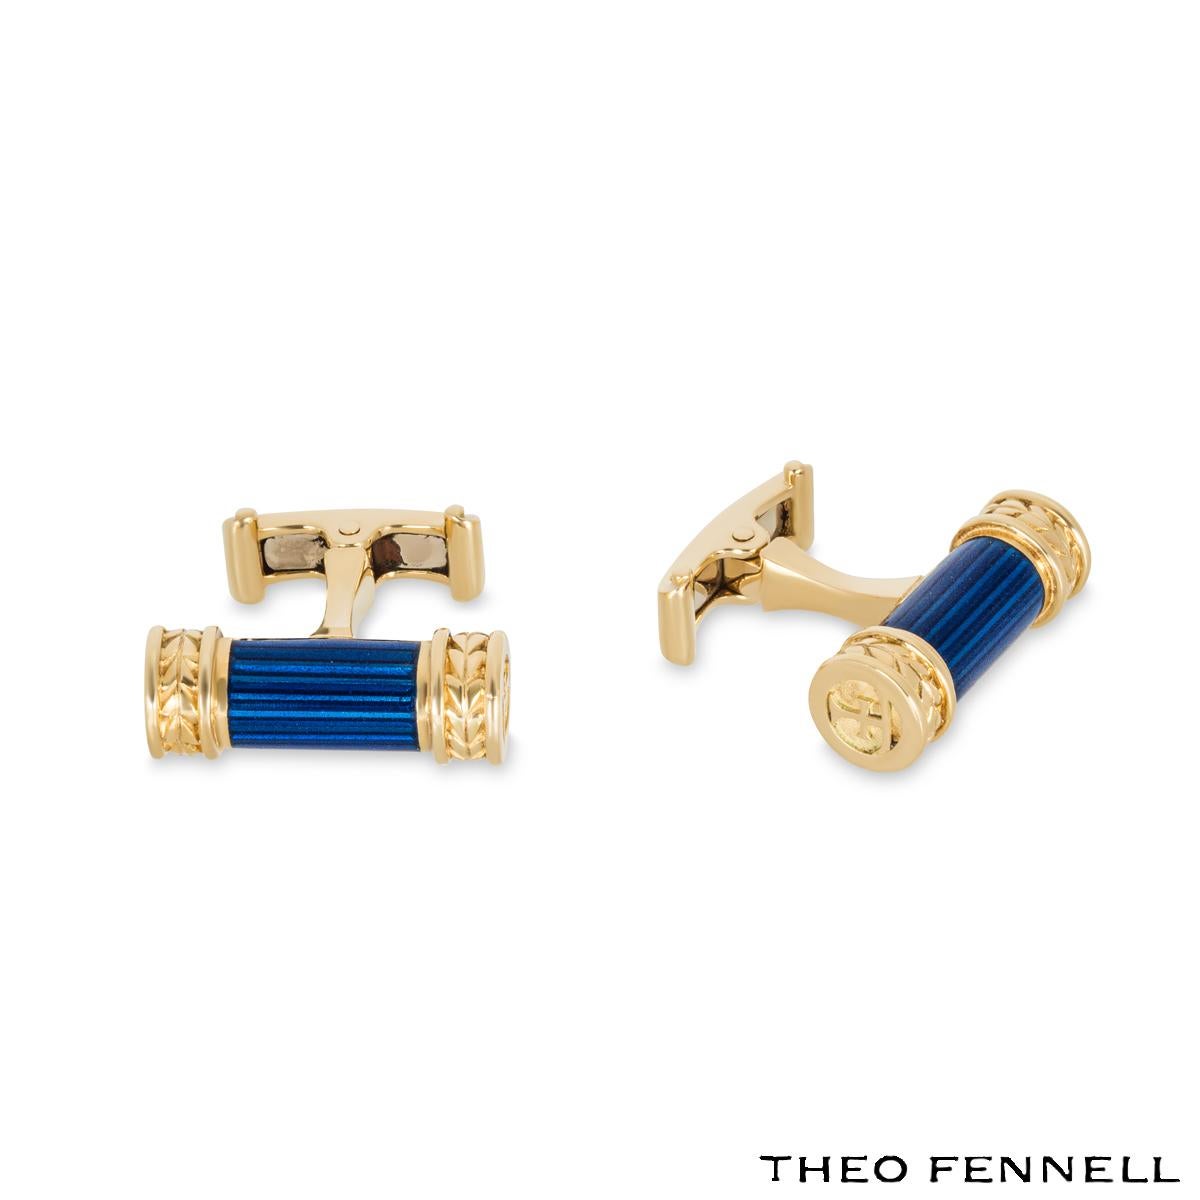 An 18k yellow gold pair of enamel cufflinks by Theo Fennell. The cufflinks are set with blue enamel through the middle with gold sides that have the iconic 'TF' motif. The cufflinks have a classic hinged T bar fitting. The cufflinks measure 0.8